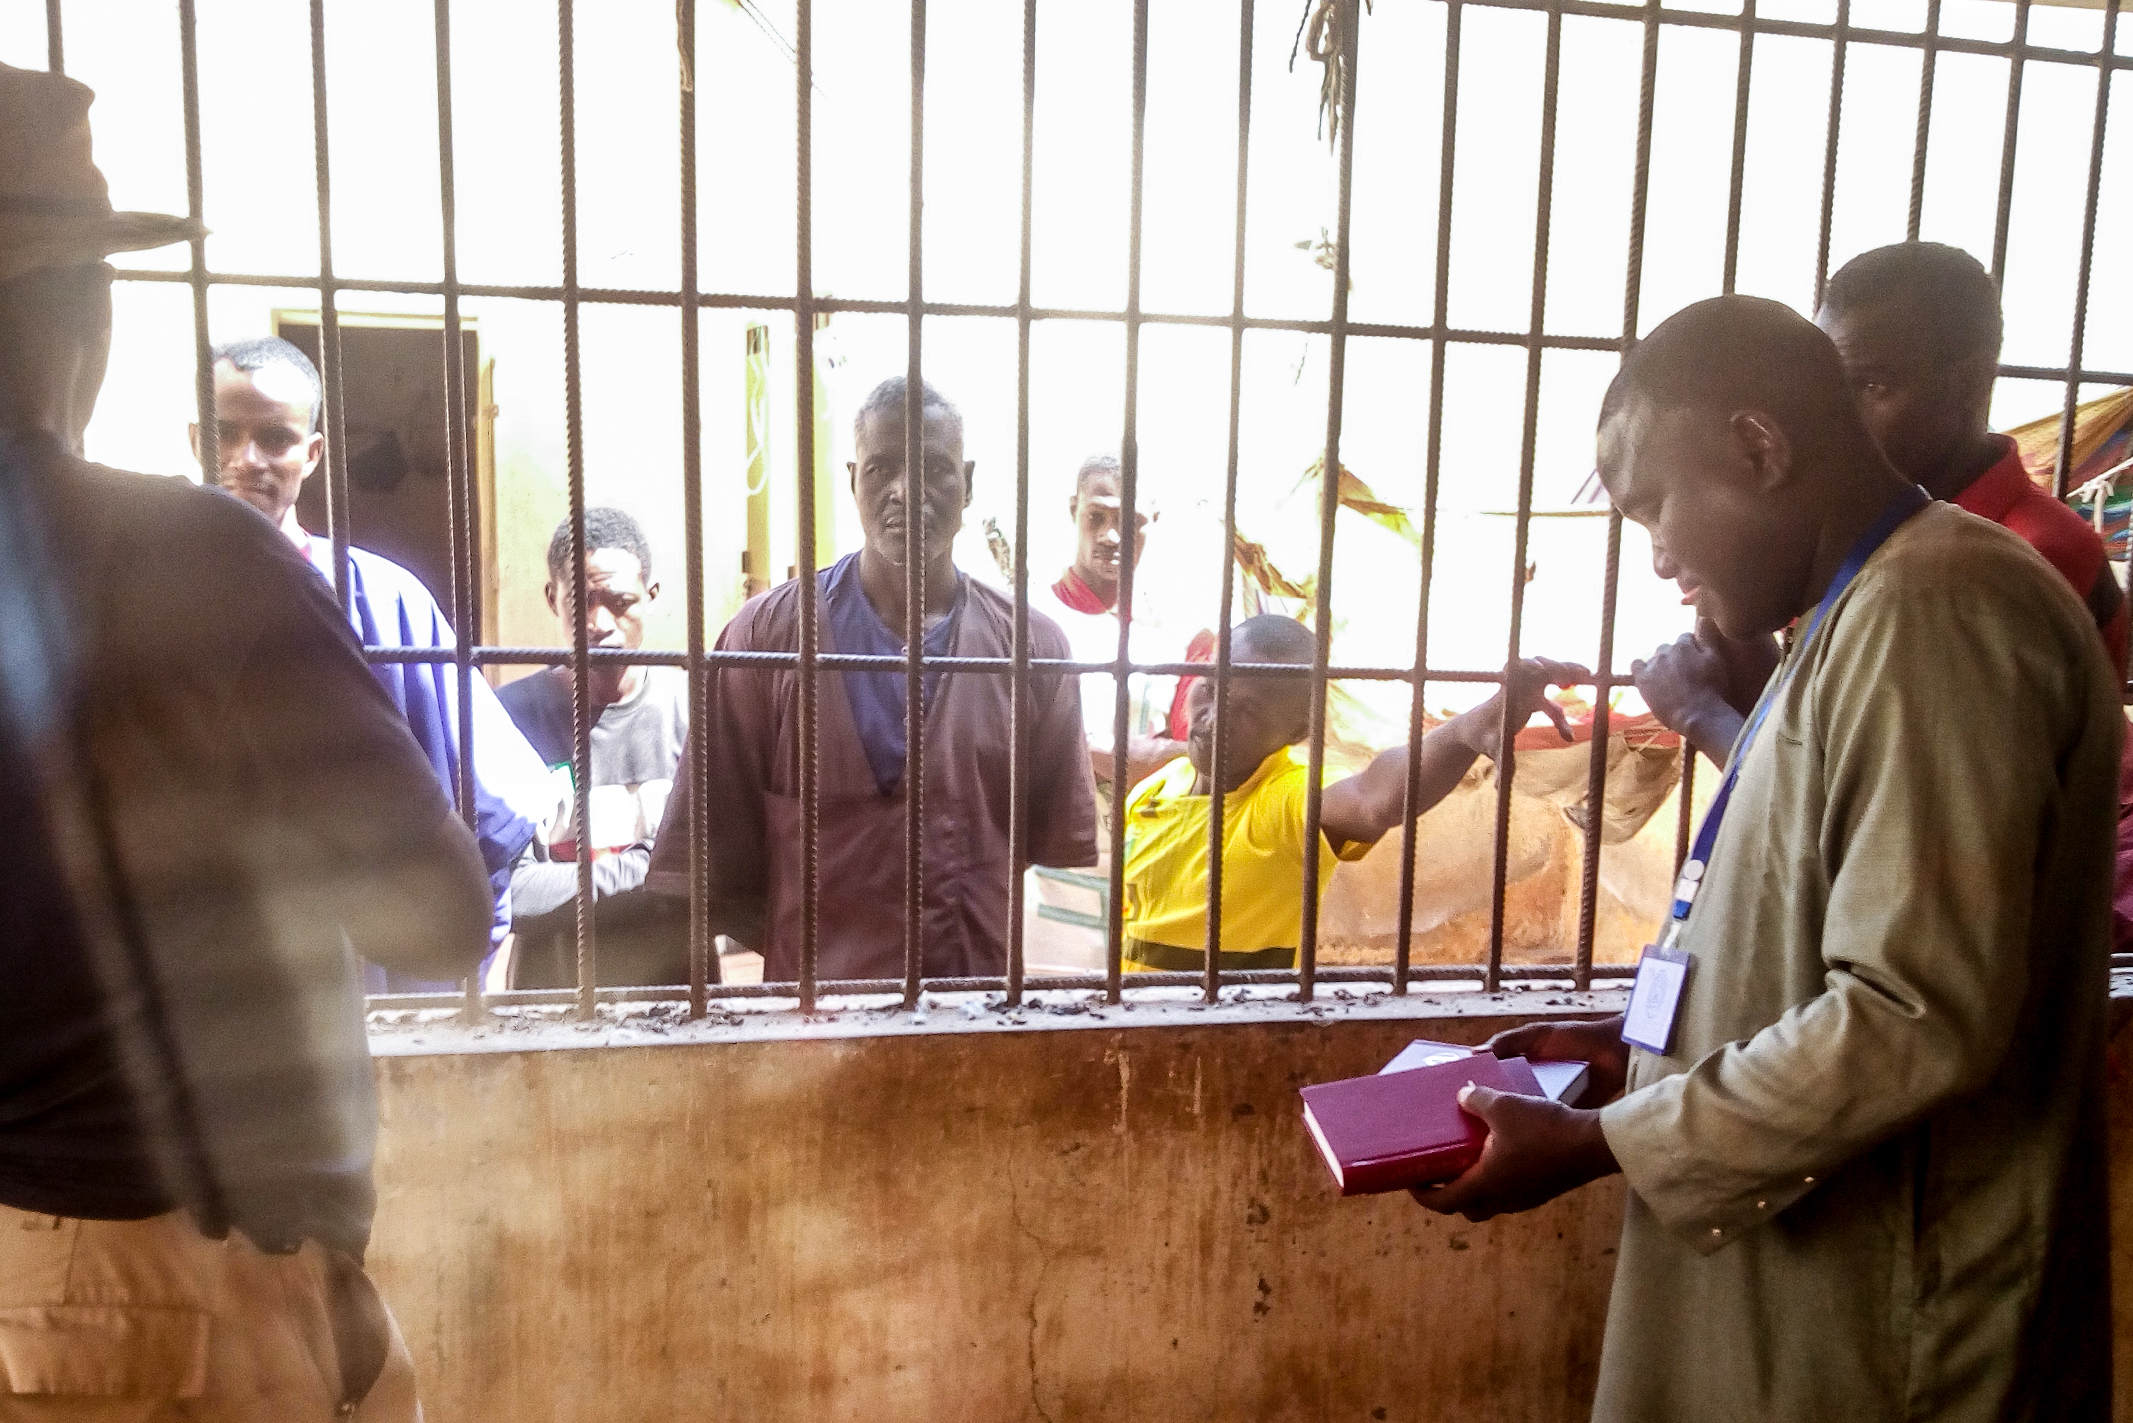 Christian missionaries in Mali passing out Bibles to inmates behind bars